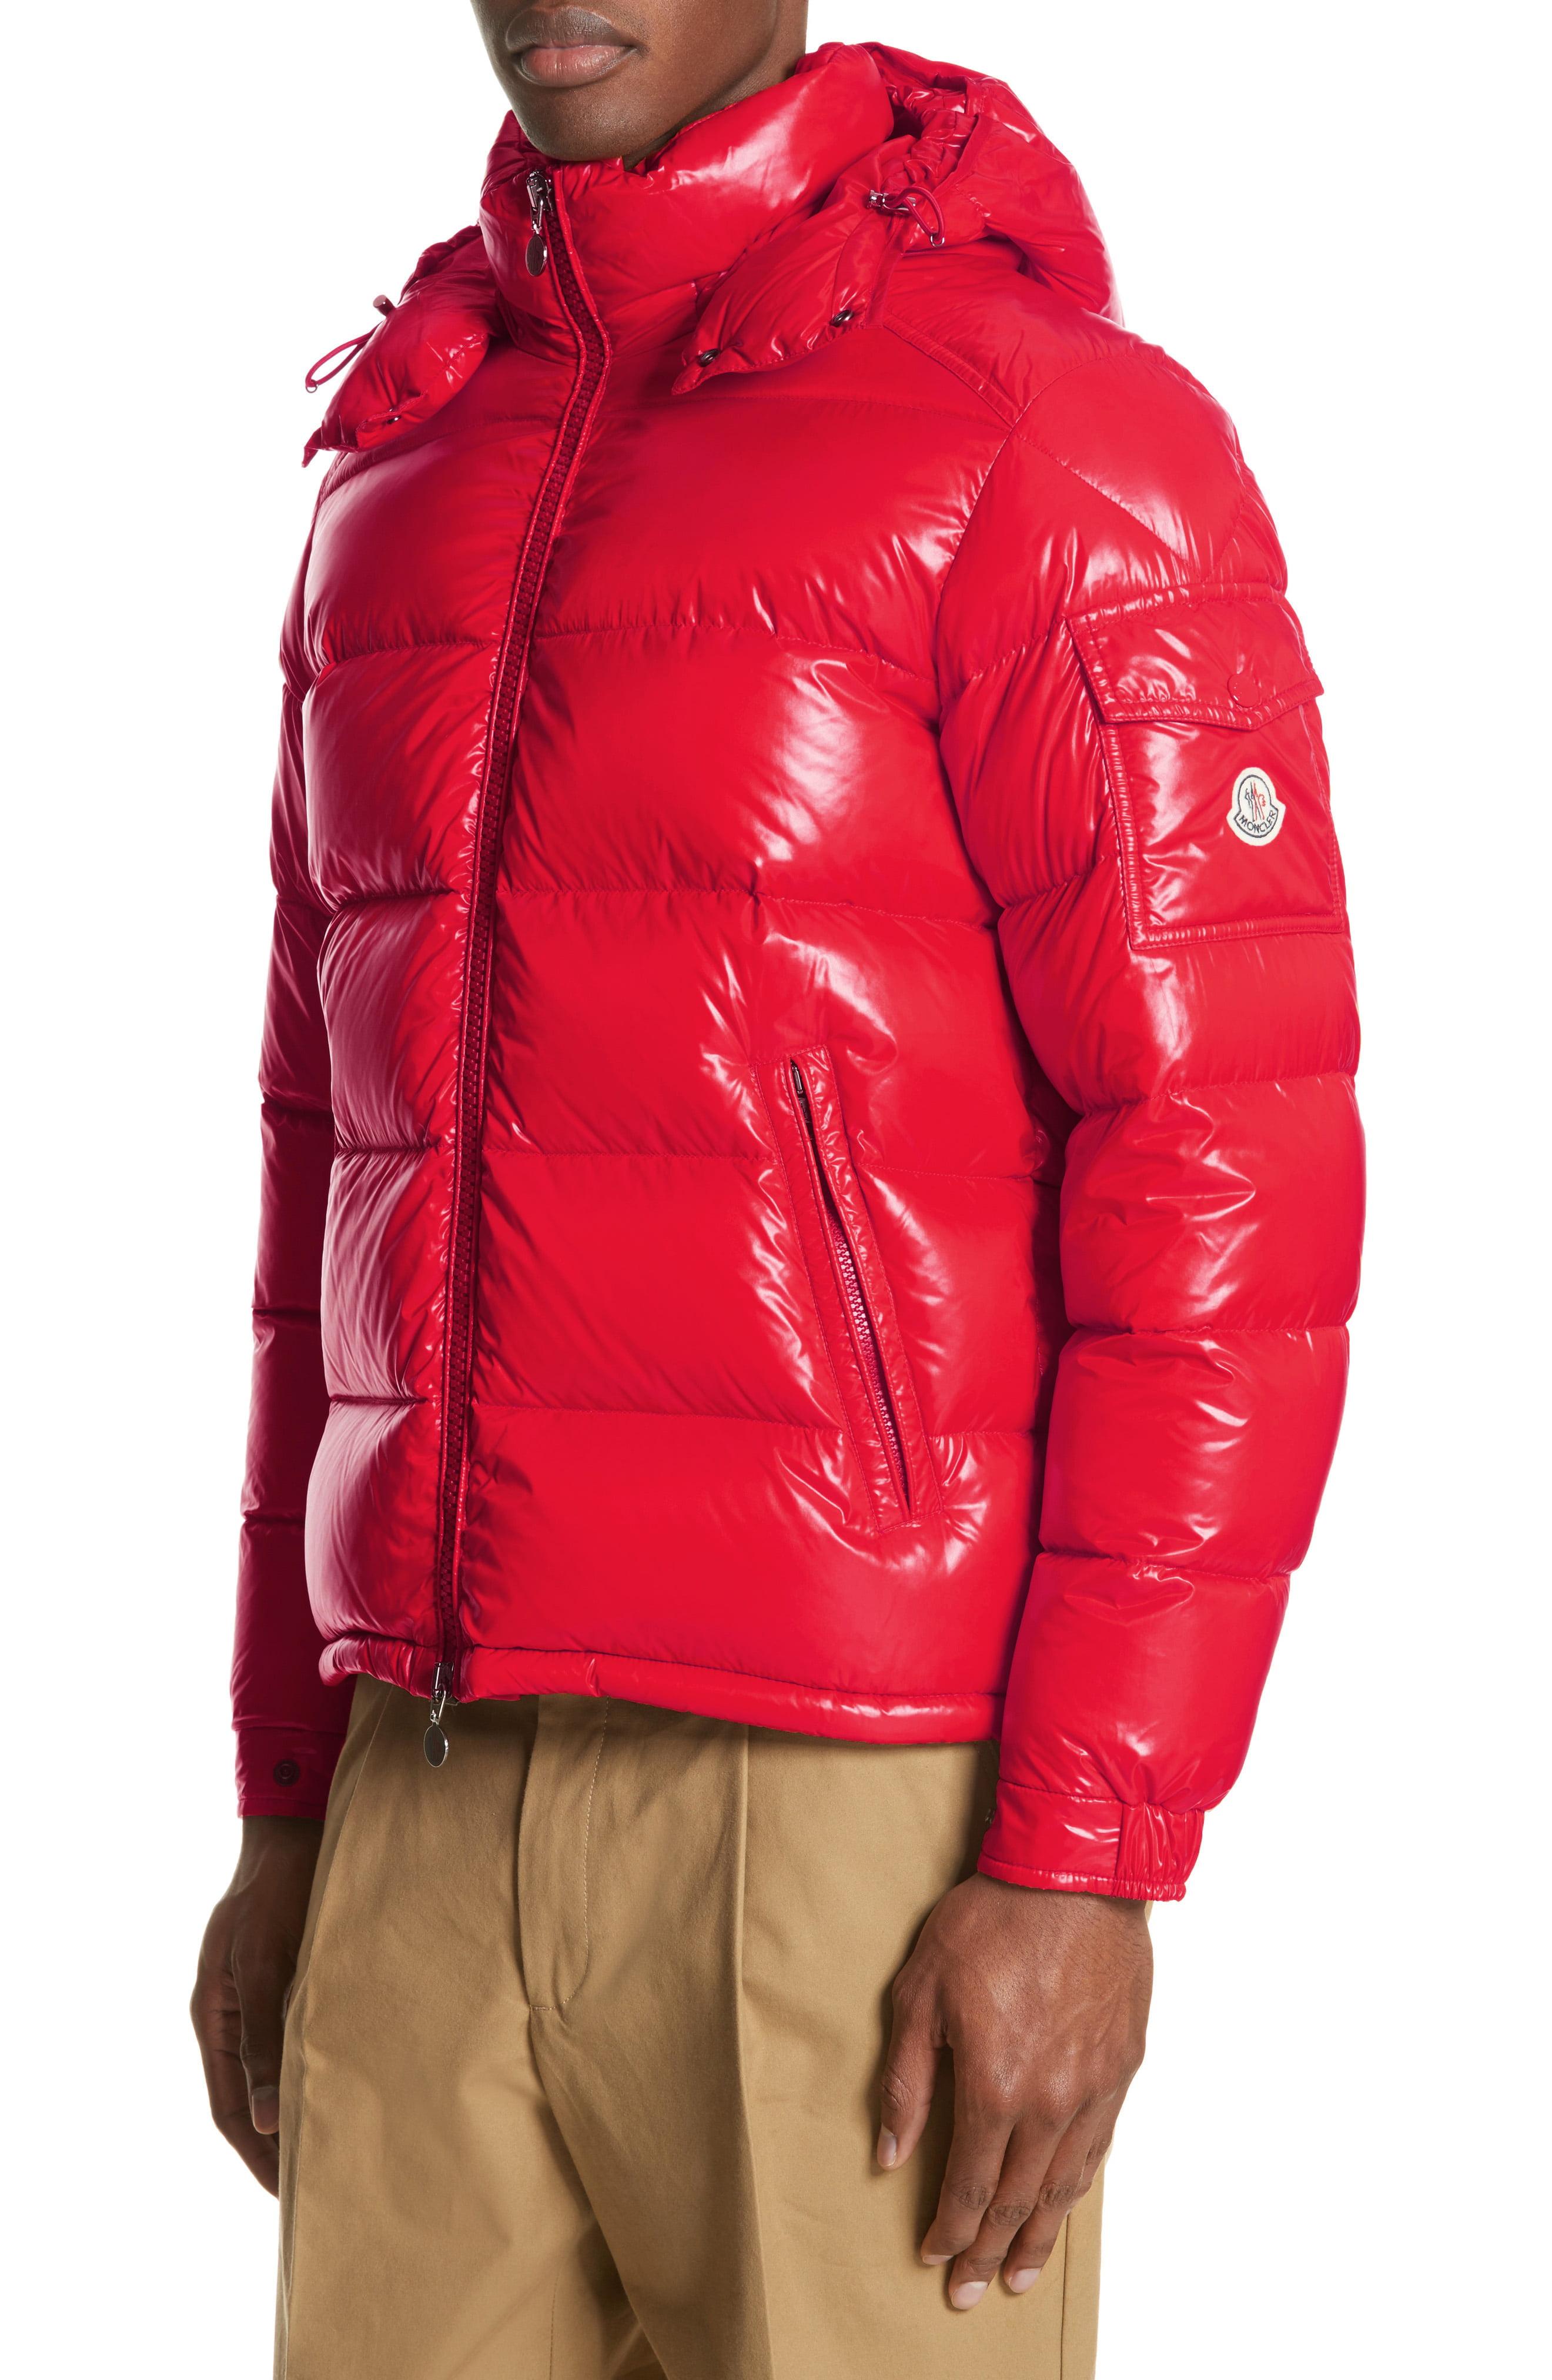 Moncler Maya Laque Quilted Down Jacket in Red for Men - Lyst